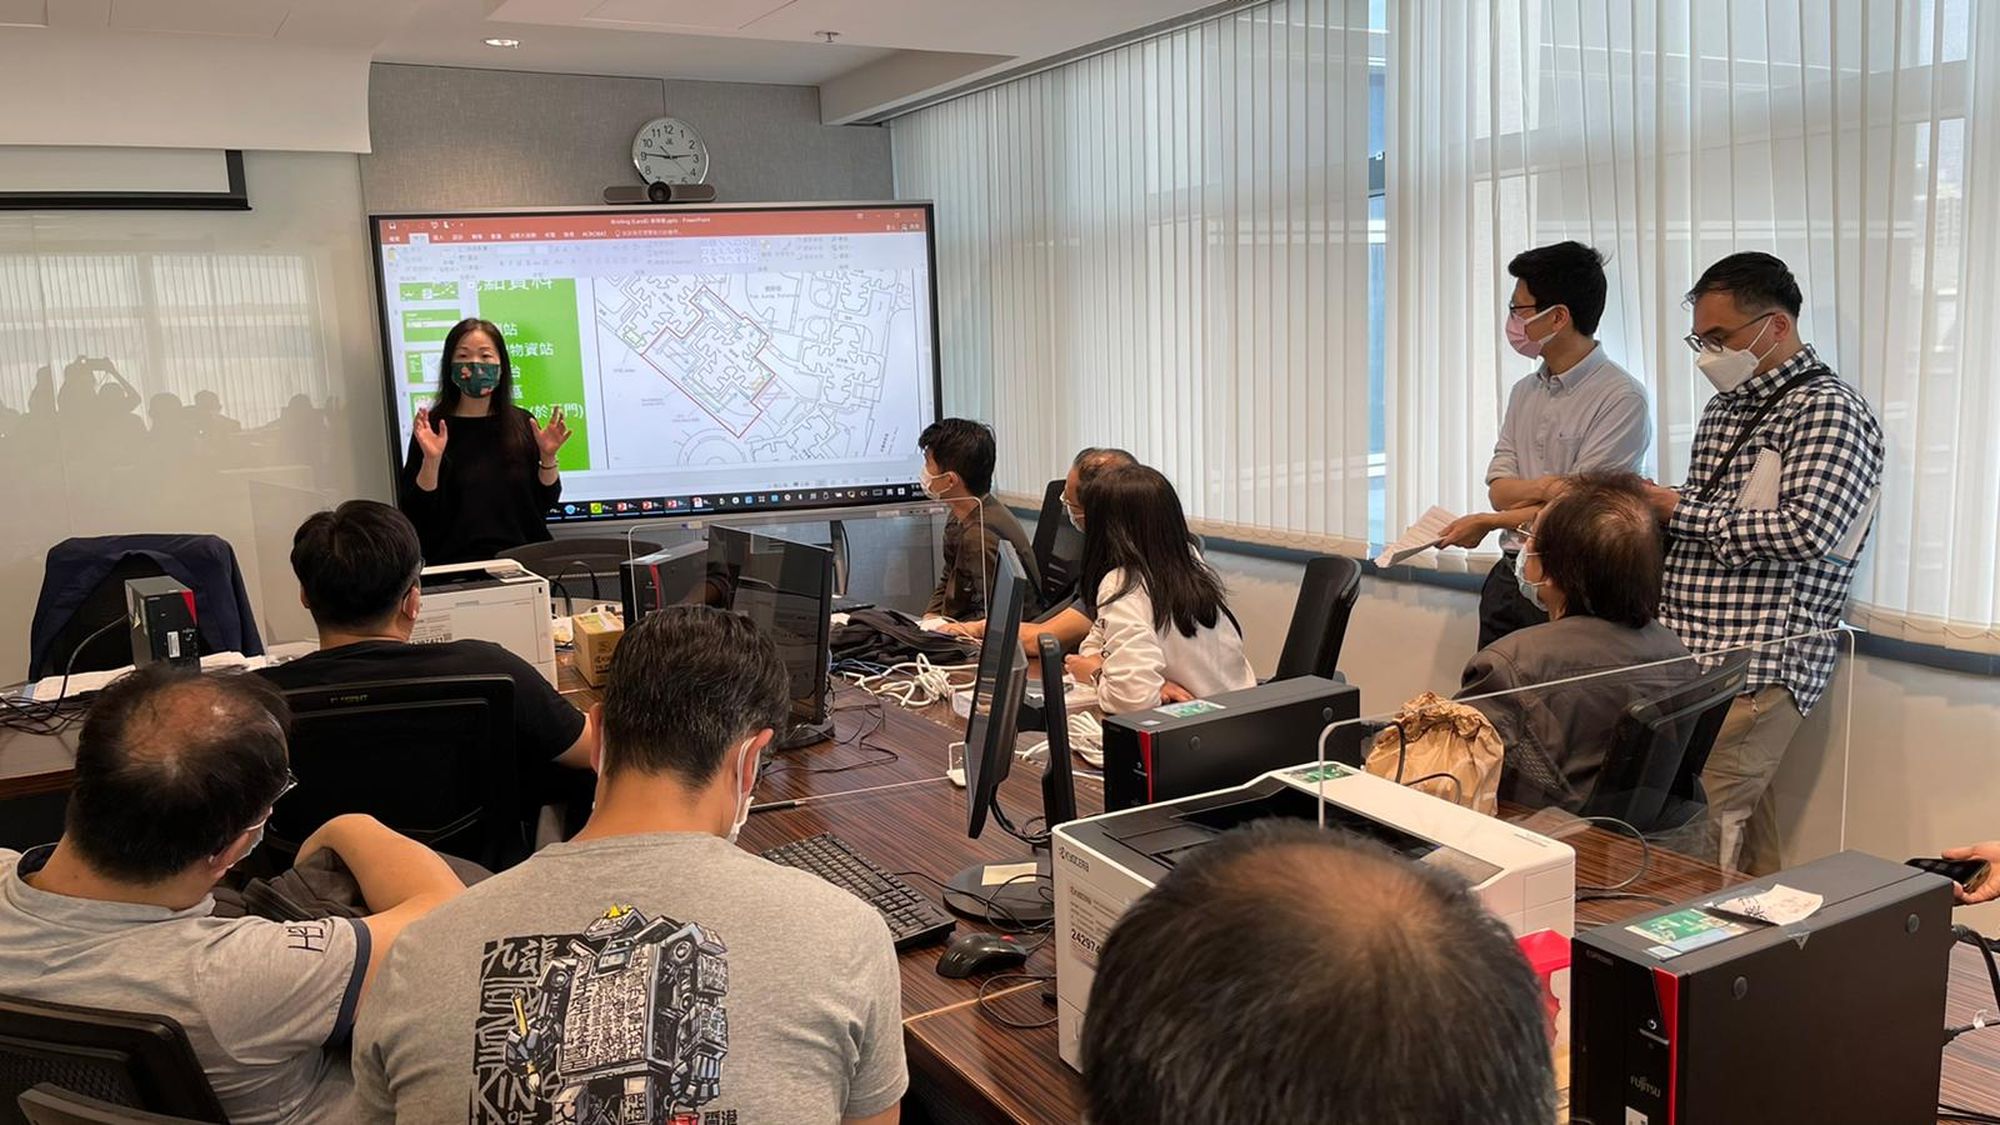 On 4 and 5 March, more than 120 colleagues from the Planning and Lands Branch of the DEVB and the Lands Department (LandsD) were mobilised to conduct an RTD operation in respect of Tak Cheung House, Tak Long Estate, Kowloon City. Taking charge of the operation, Assistant Director of the LandsD, Ms CHIU Lee-lee, Lily (first left, standing), briefs colleagues on the procedures and details of the operation.